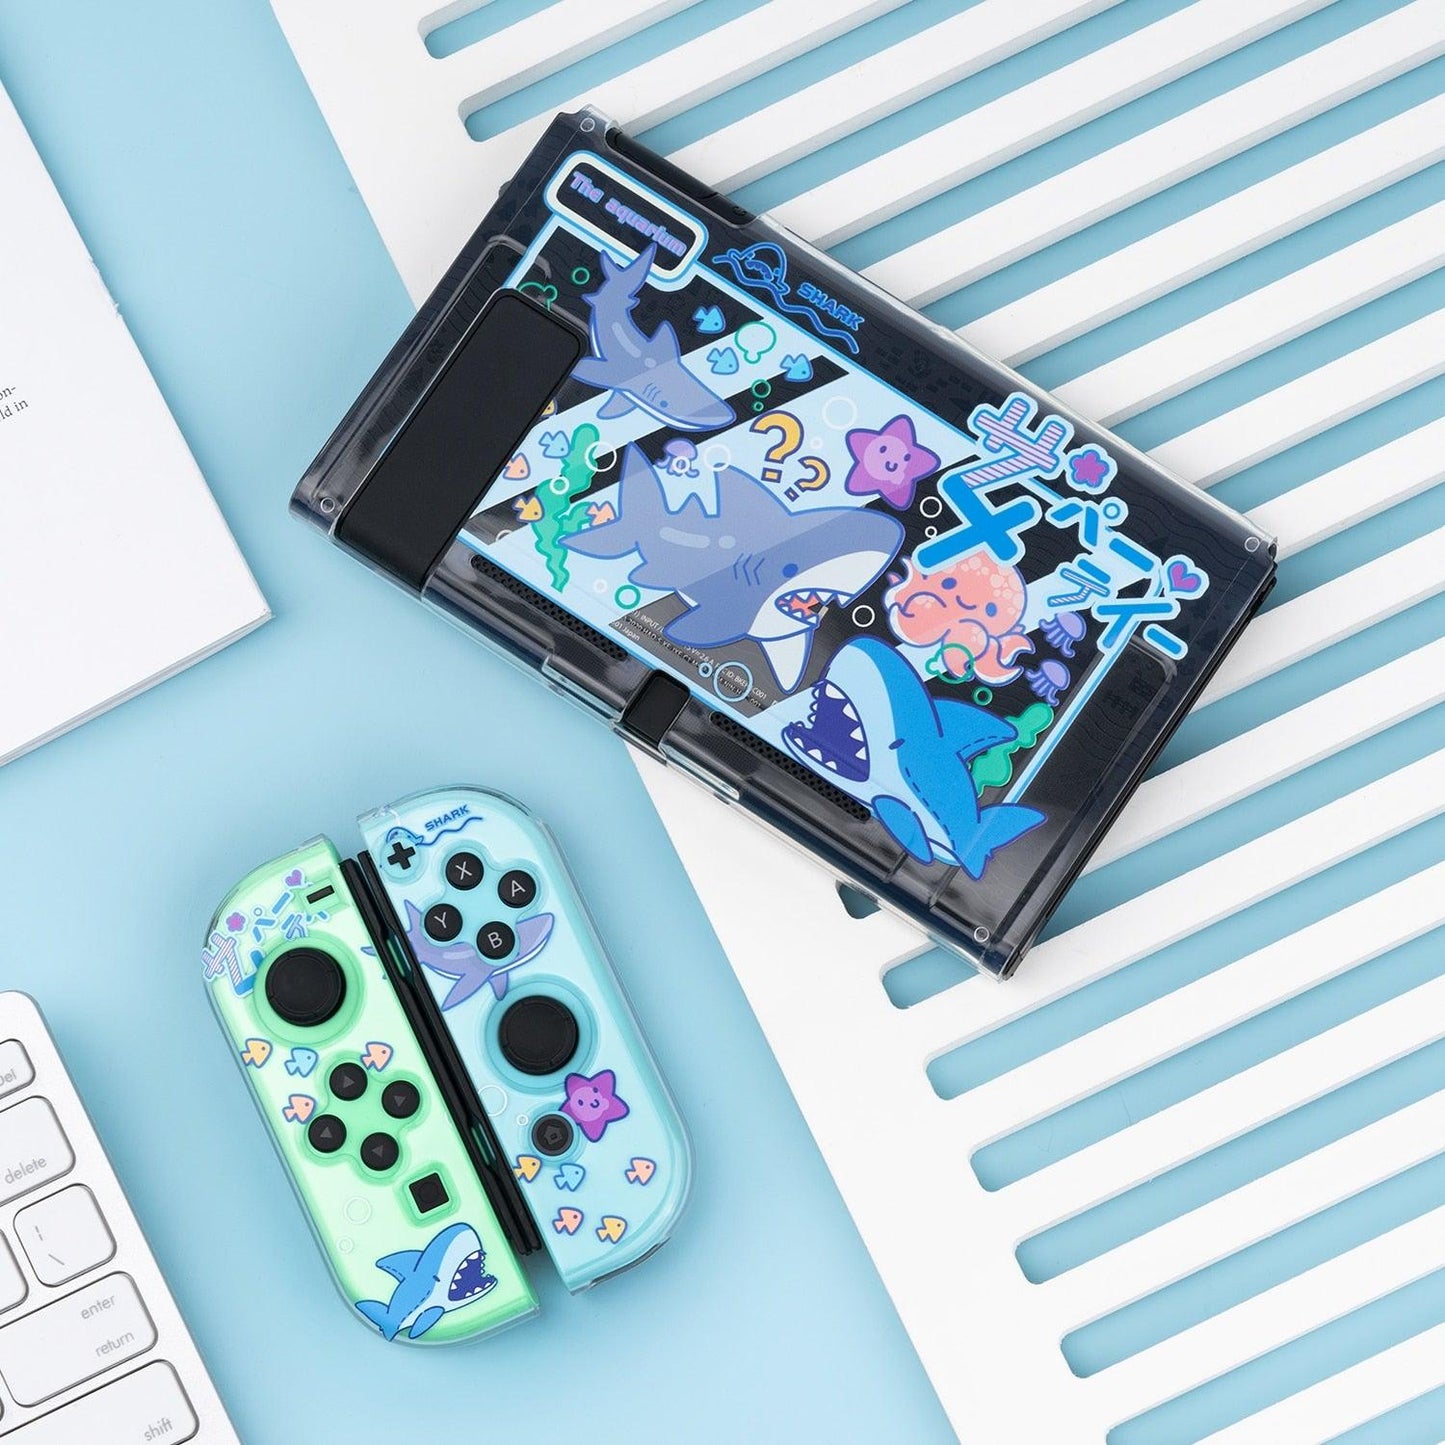 GeekShare Nintendo Switch Shell Cute Shark Party TPU Soft Full Cover Case For Nintendo Switch Joy-con Cover Shell NS Accessories - YOURISHOP.COM